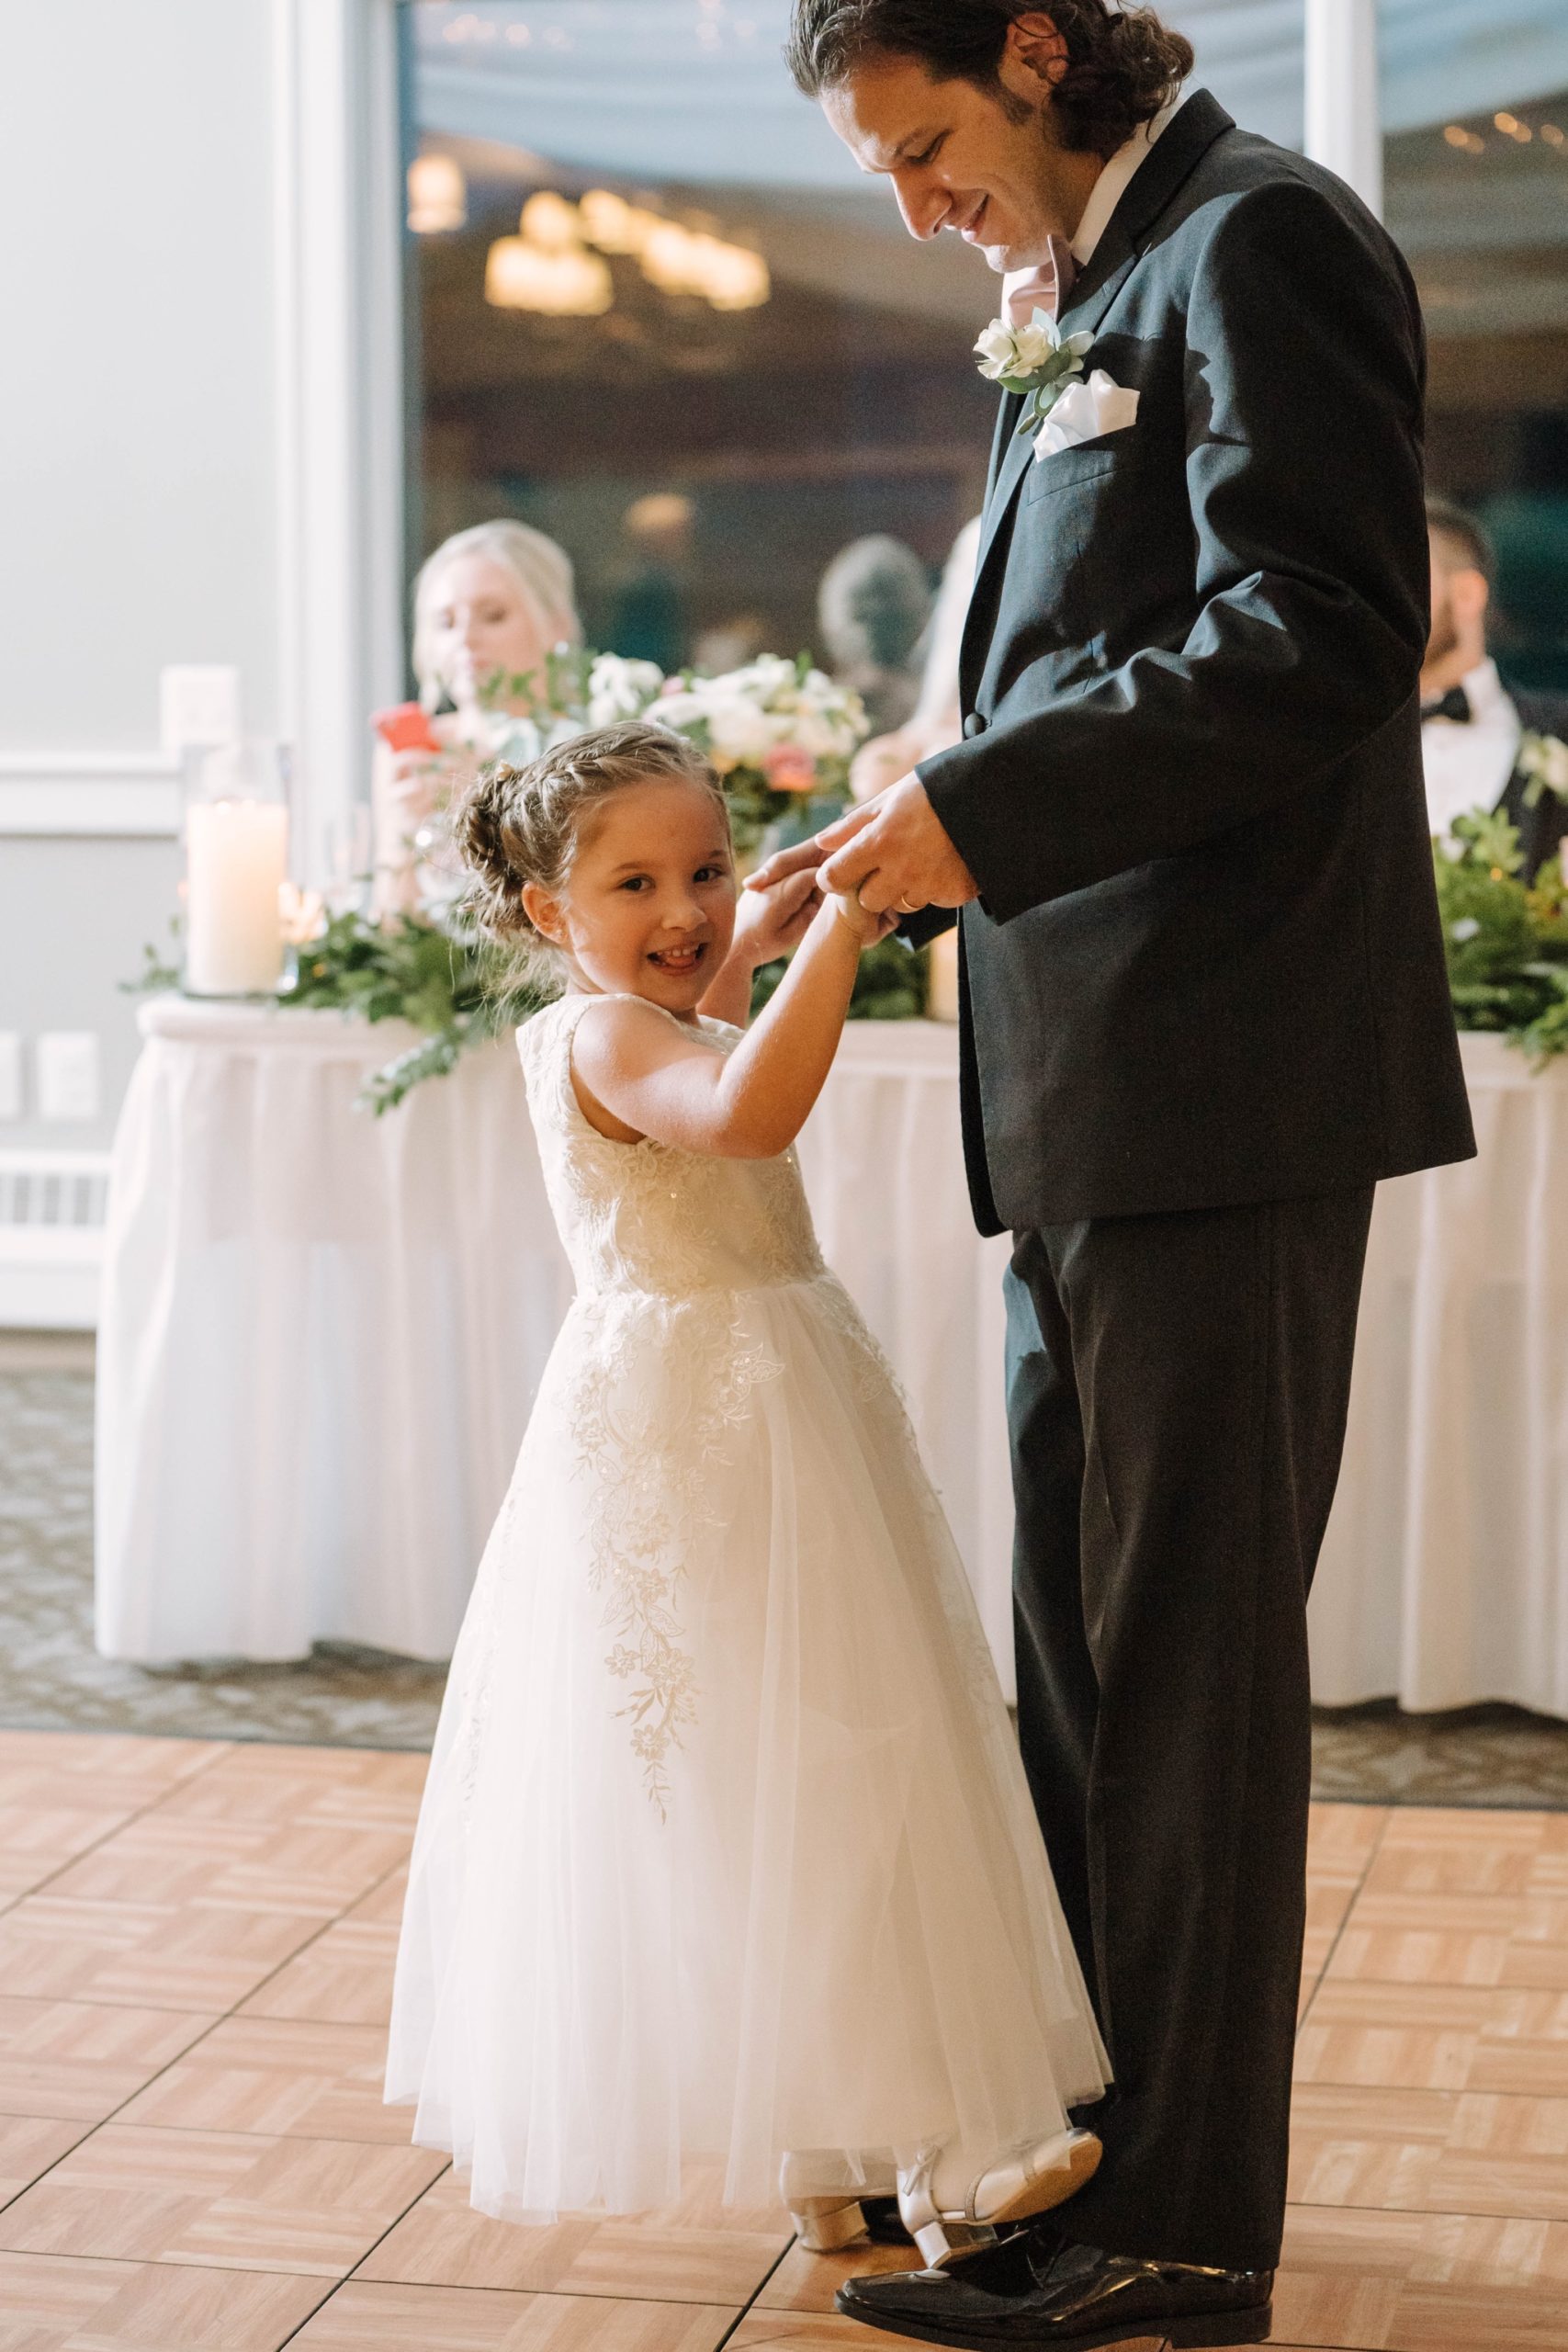 flower girl dancing with dad at wedding reception